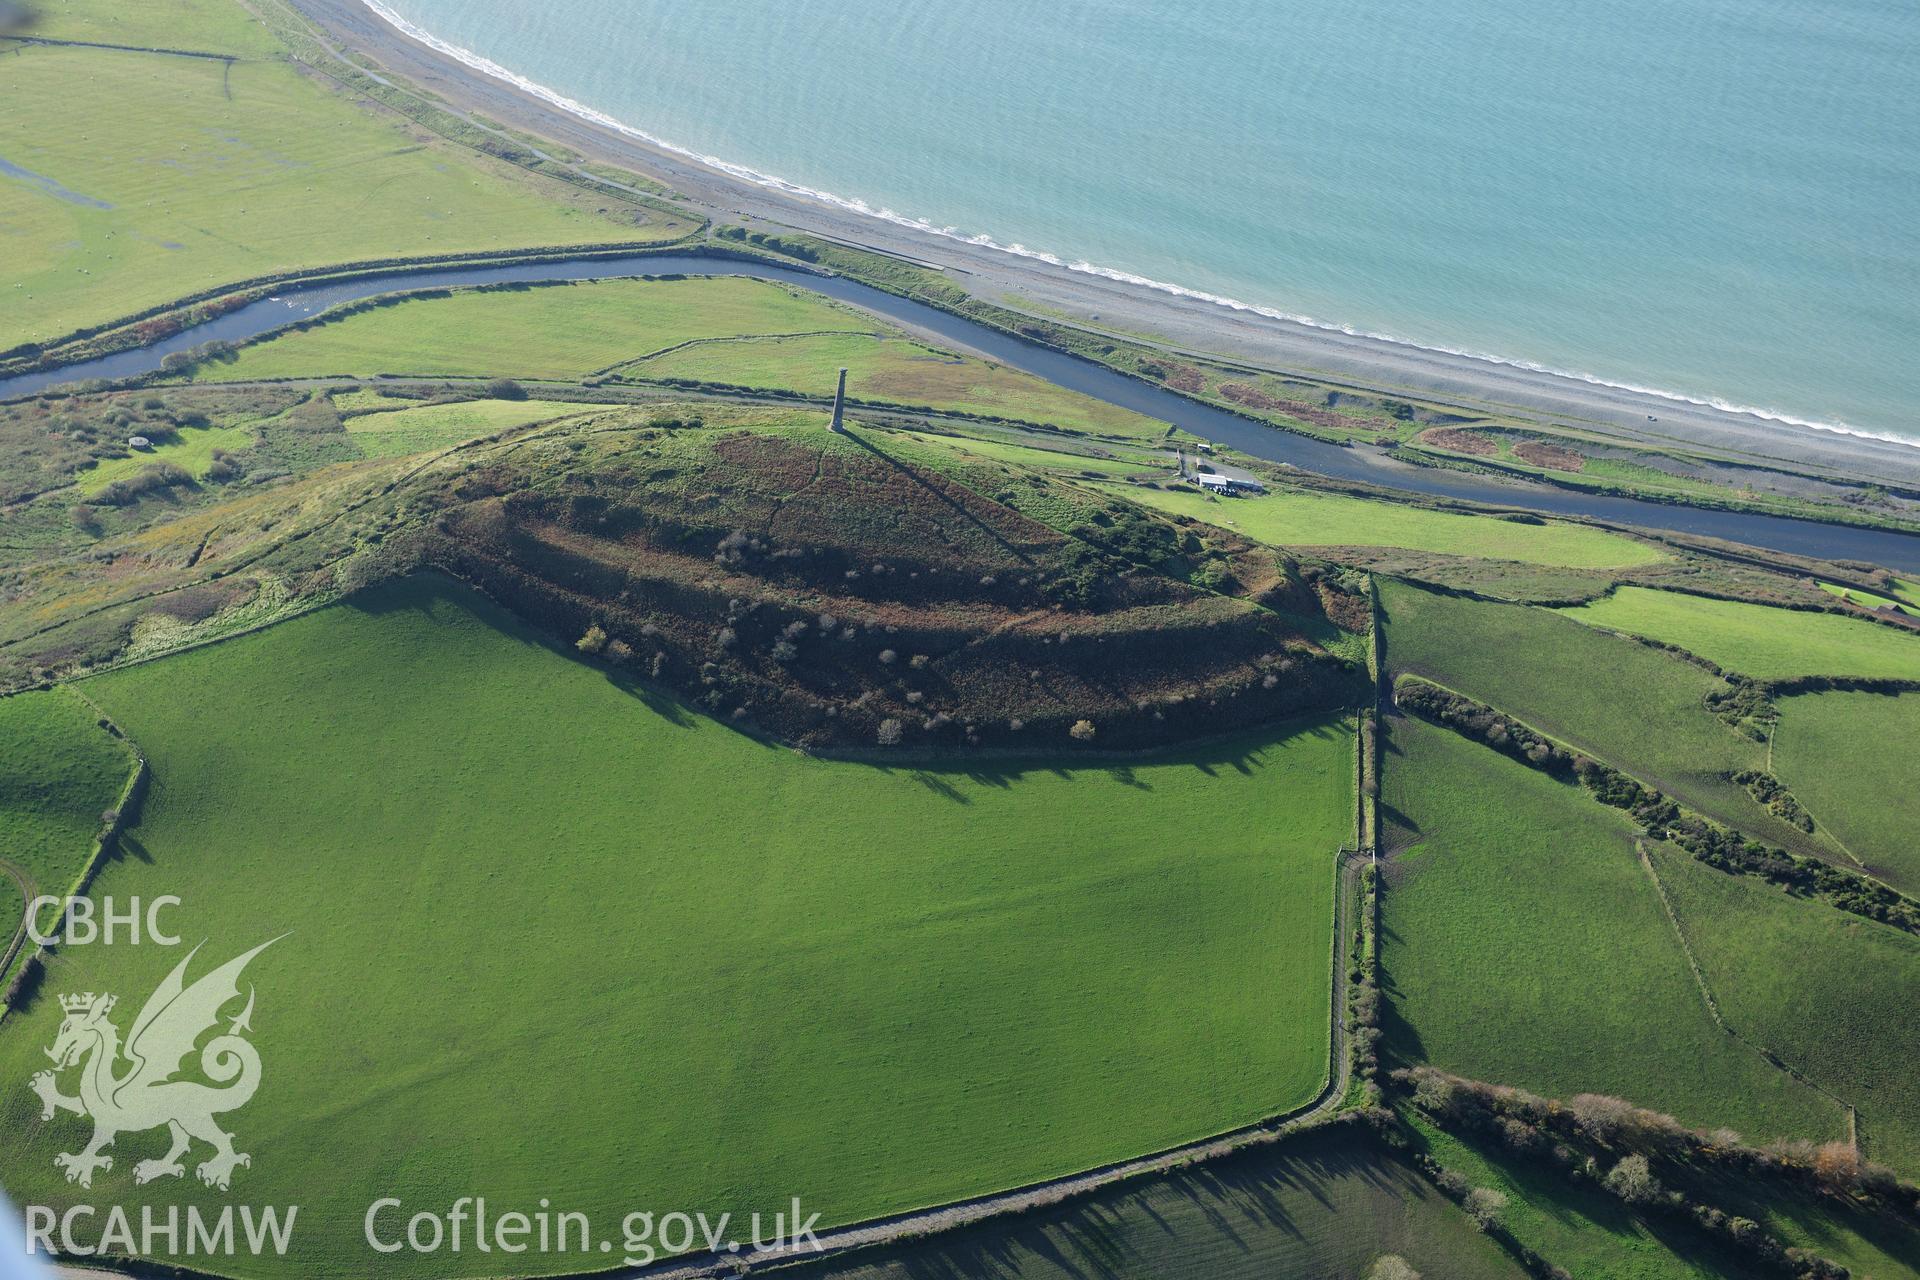 RCAHMW colour oblique photograph of Pen Dinas Hillfort, Aberystwyth. Taken by Toby Driver on 05/11/2012.